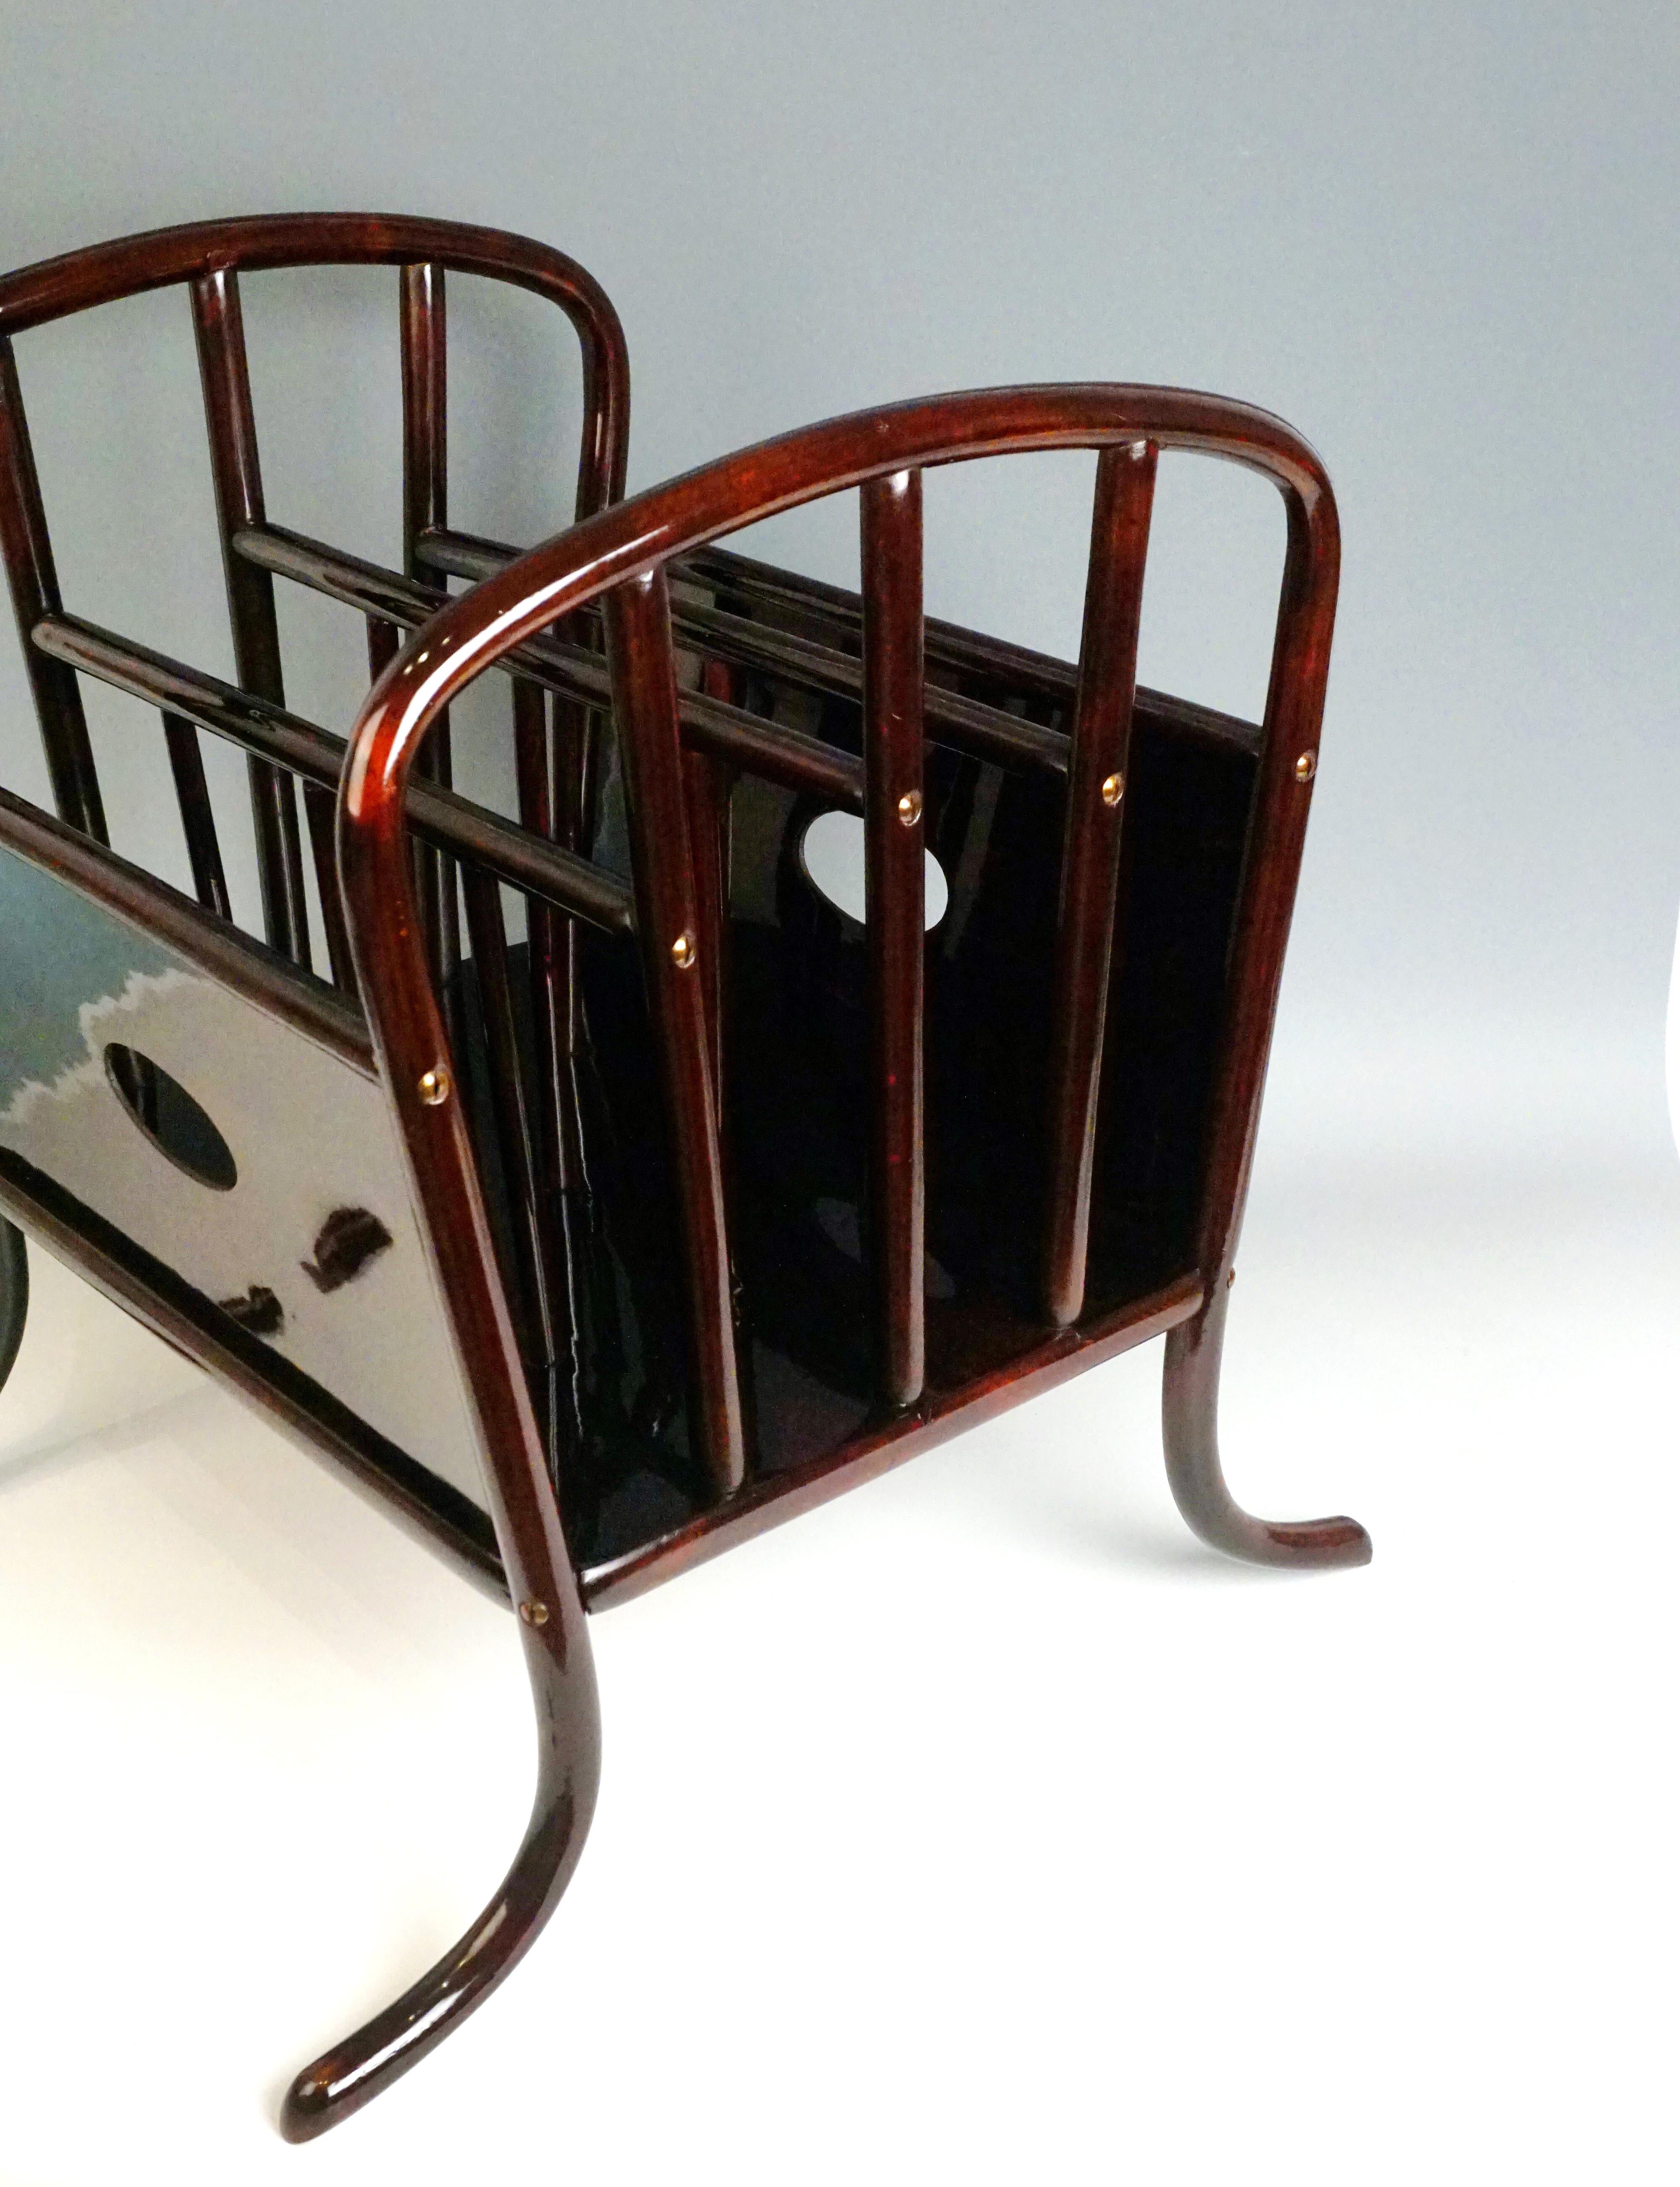 Thonet Vienna most elegant music, newspaper and magazine rack 

High quality handwork, stunningly shaped bentwood, superb appearance
Beech wood, dark mahogany stained, shellac hand polished

Manufactured by Thonet Brothers, Vienna, circa